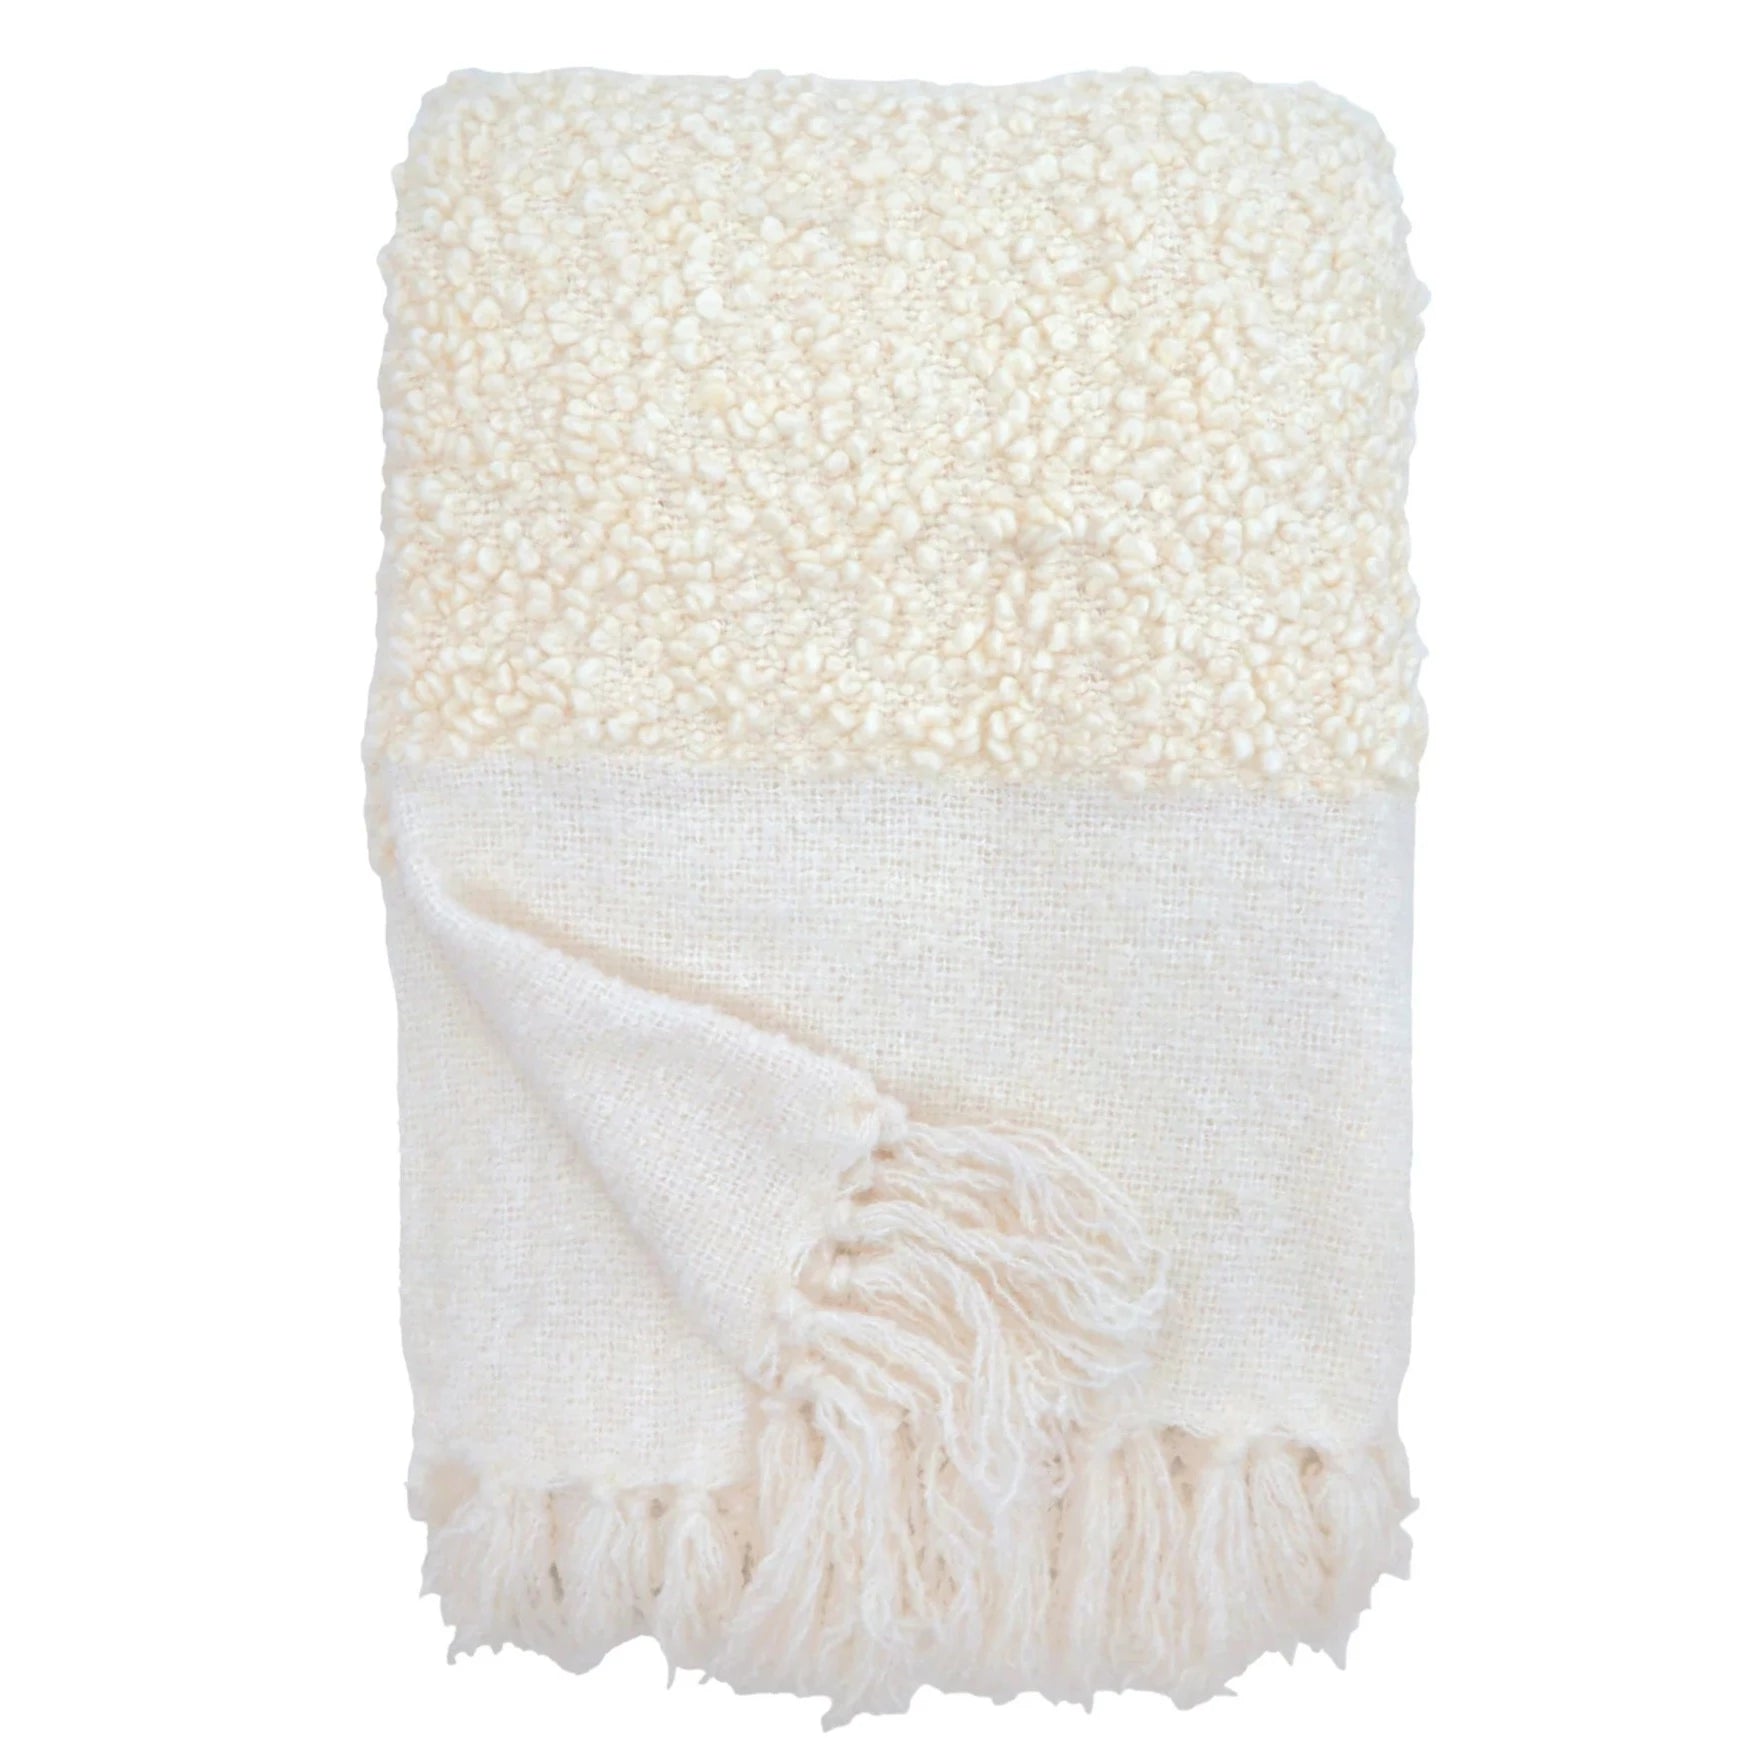 Murphy Oversized Ivory Throw by Pom Pom at Home